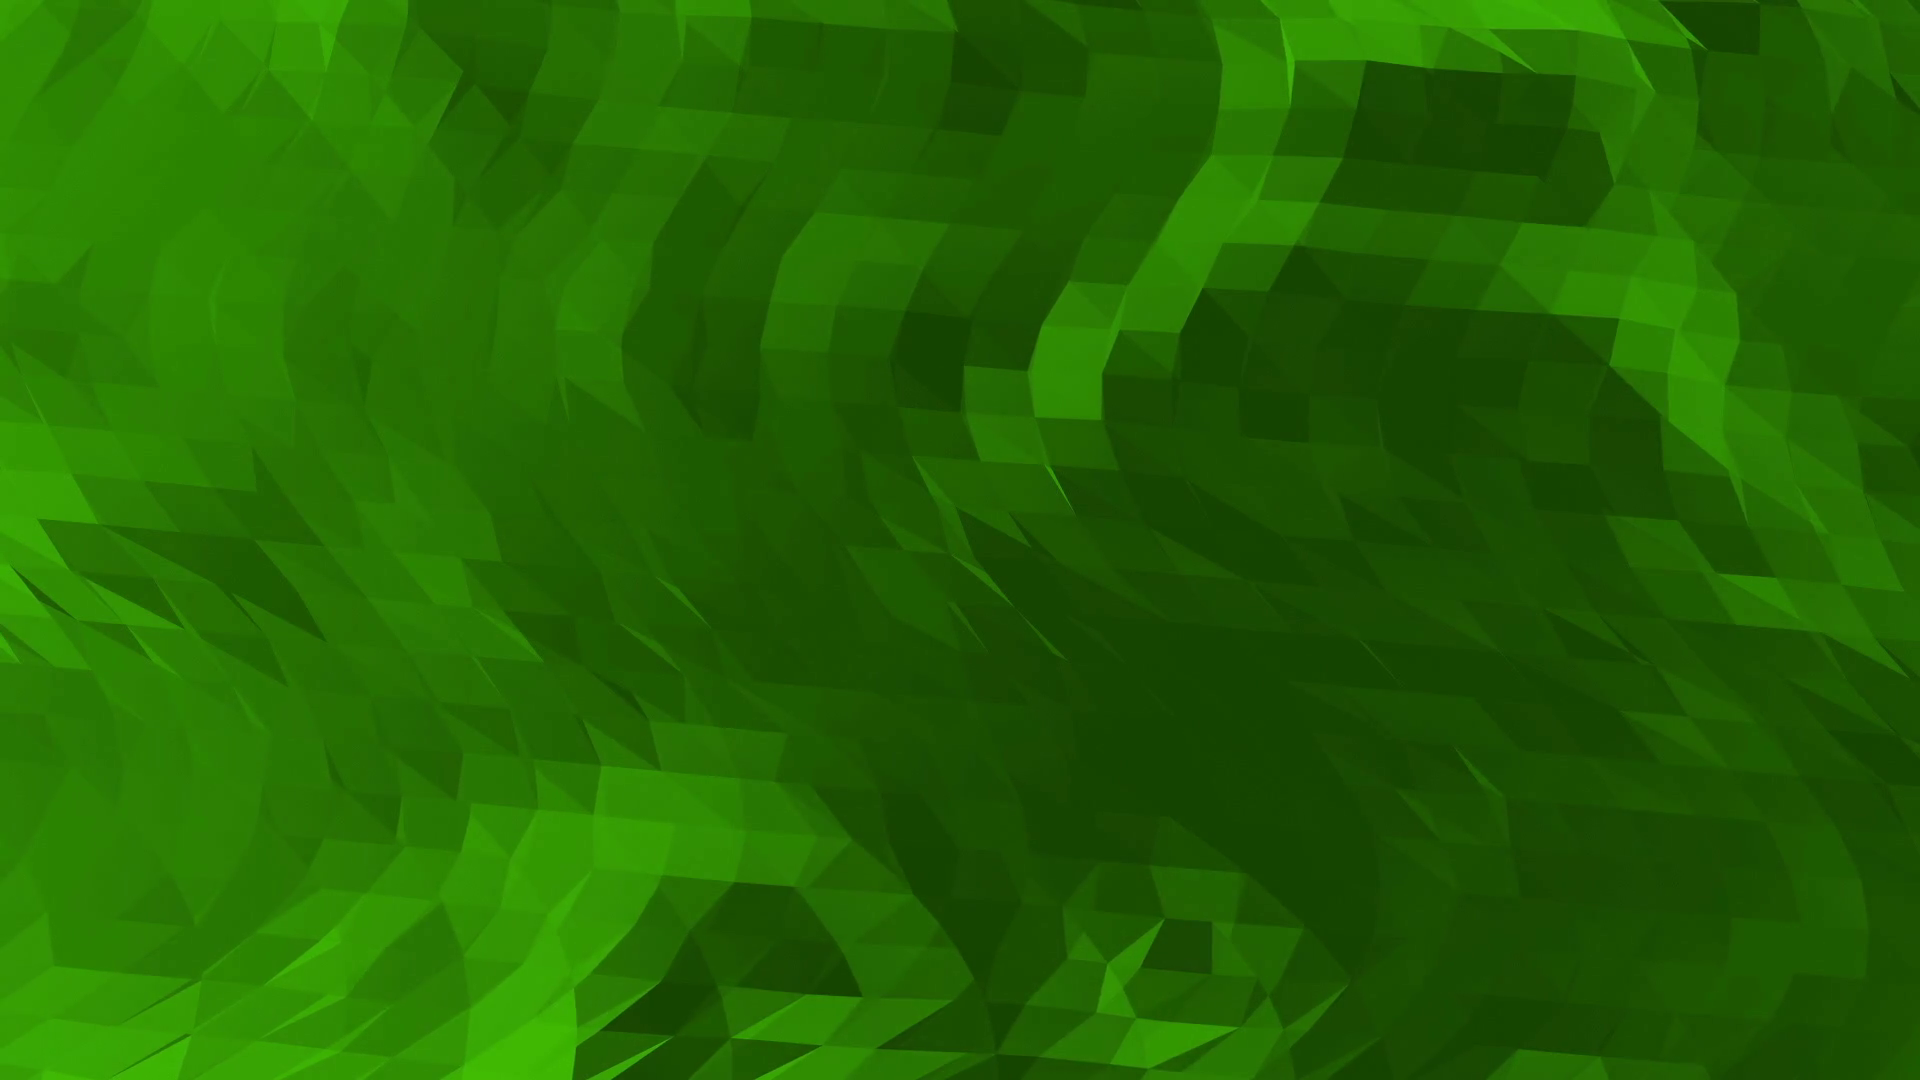 Green low poly background pulsating. Abstract low poly surface as ...